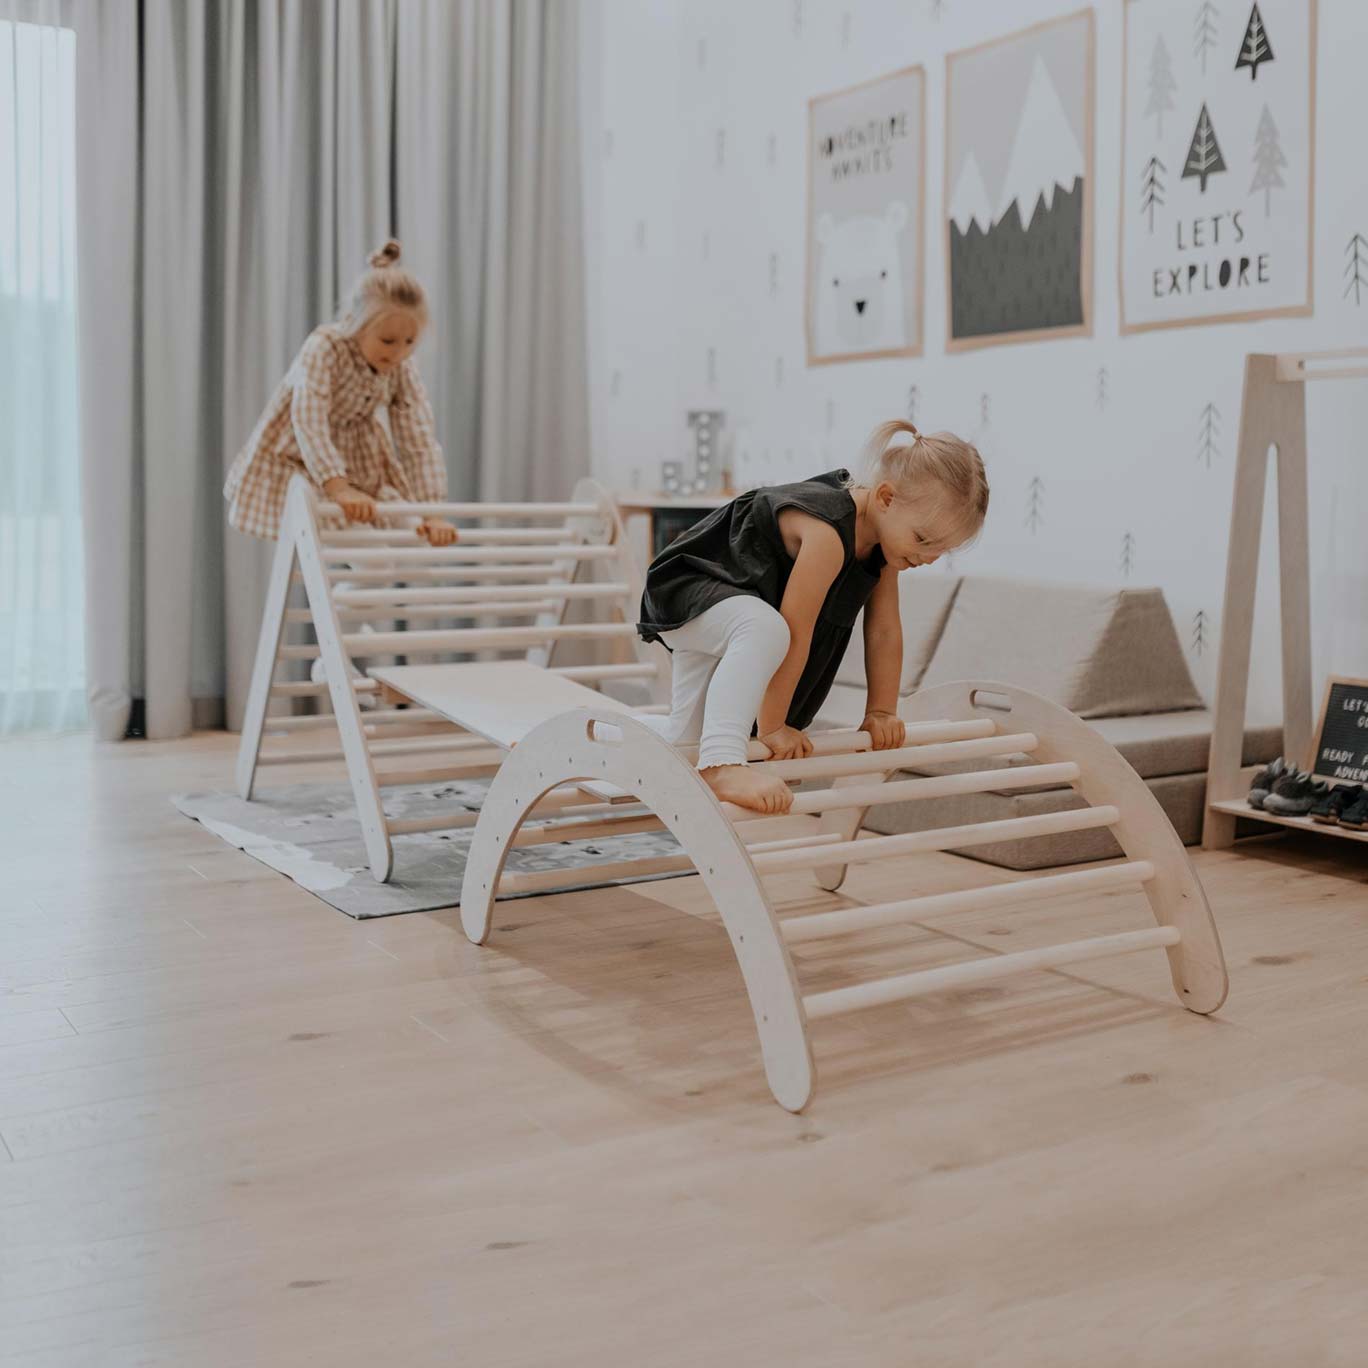 Two children playing on a wooden bed in a room.